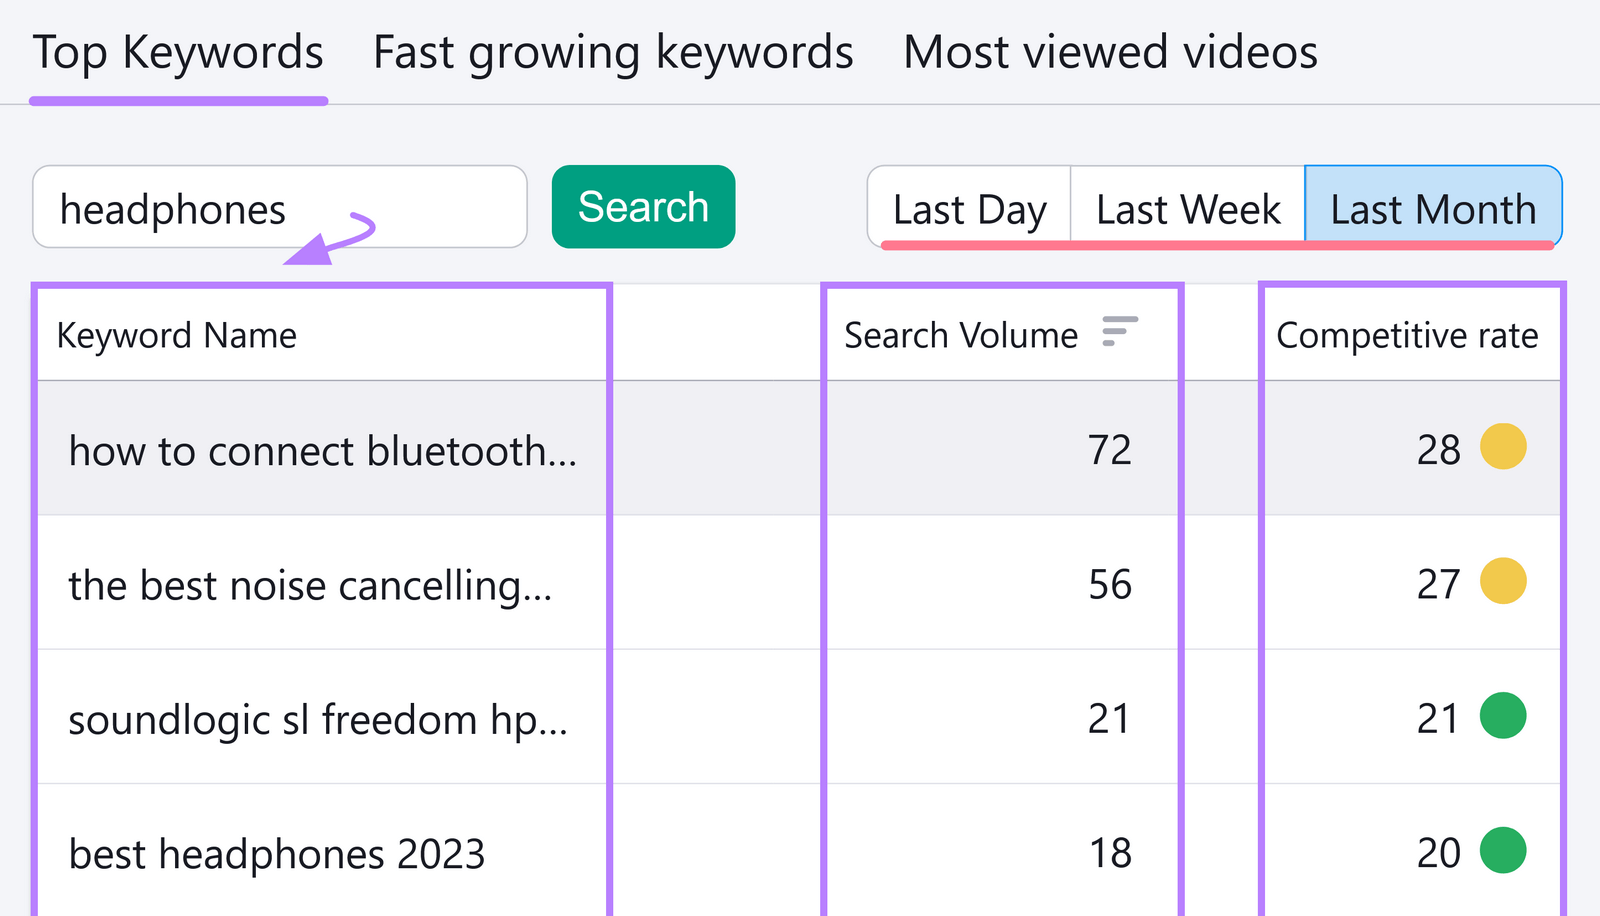 Results with YouTube keywords and their “Search Volume” and “Competitive rate" metrics.